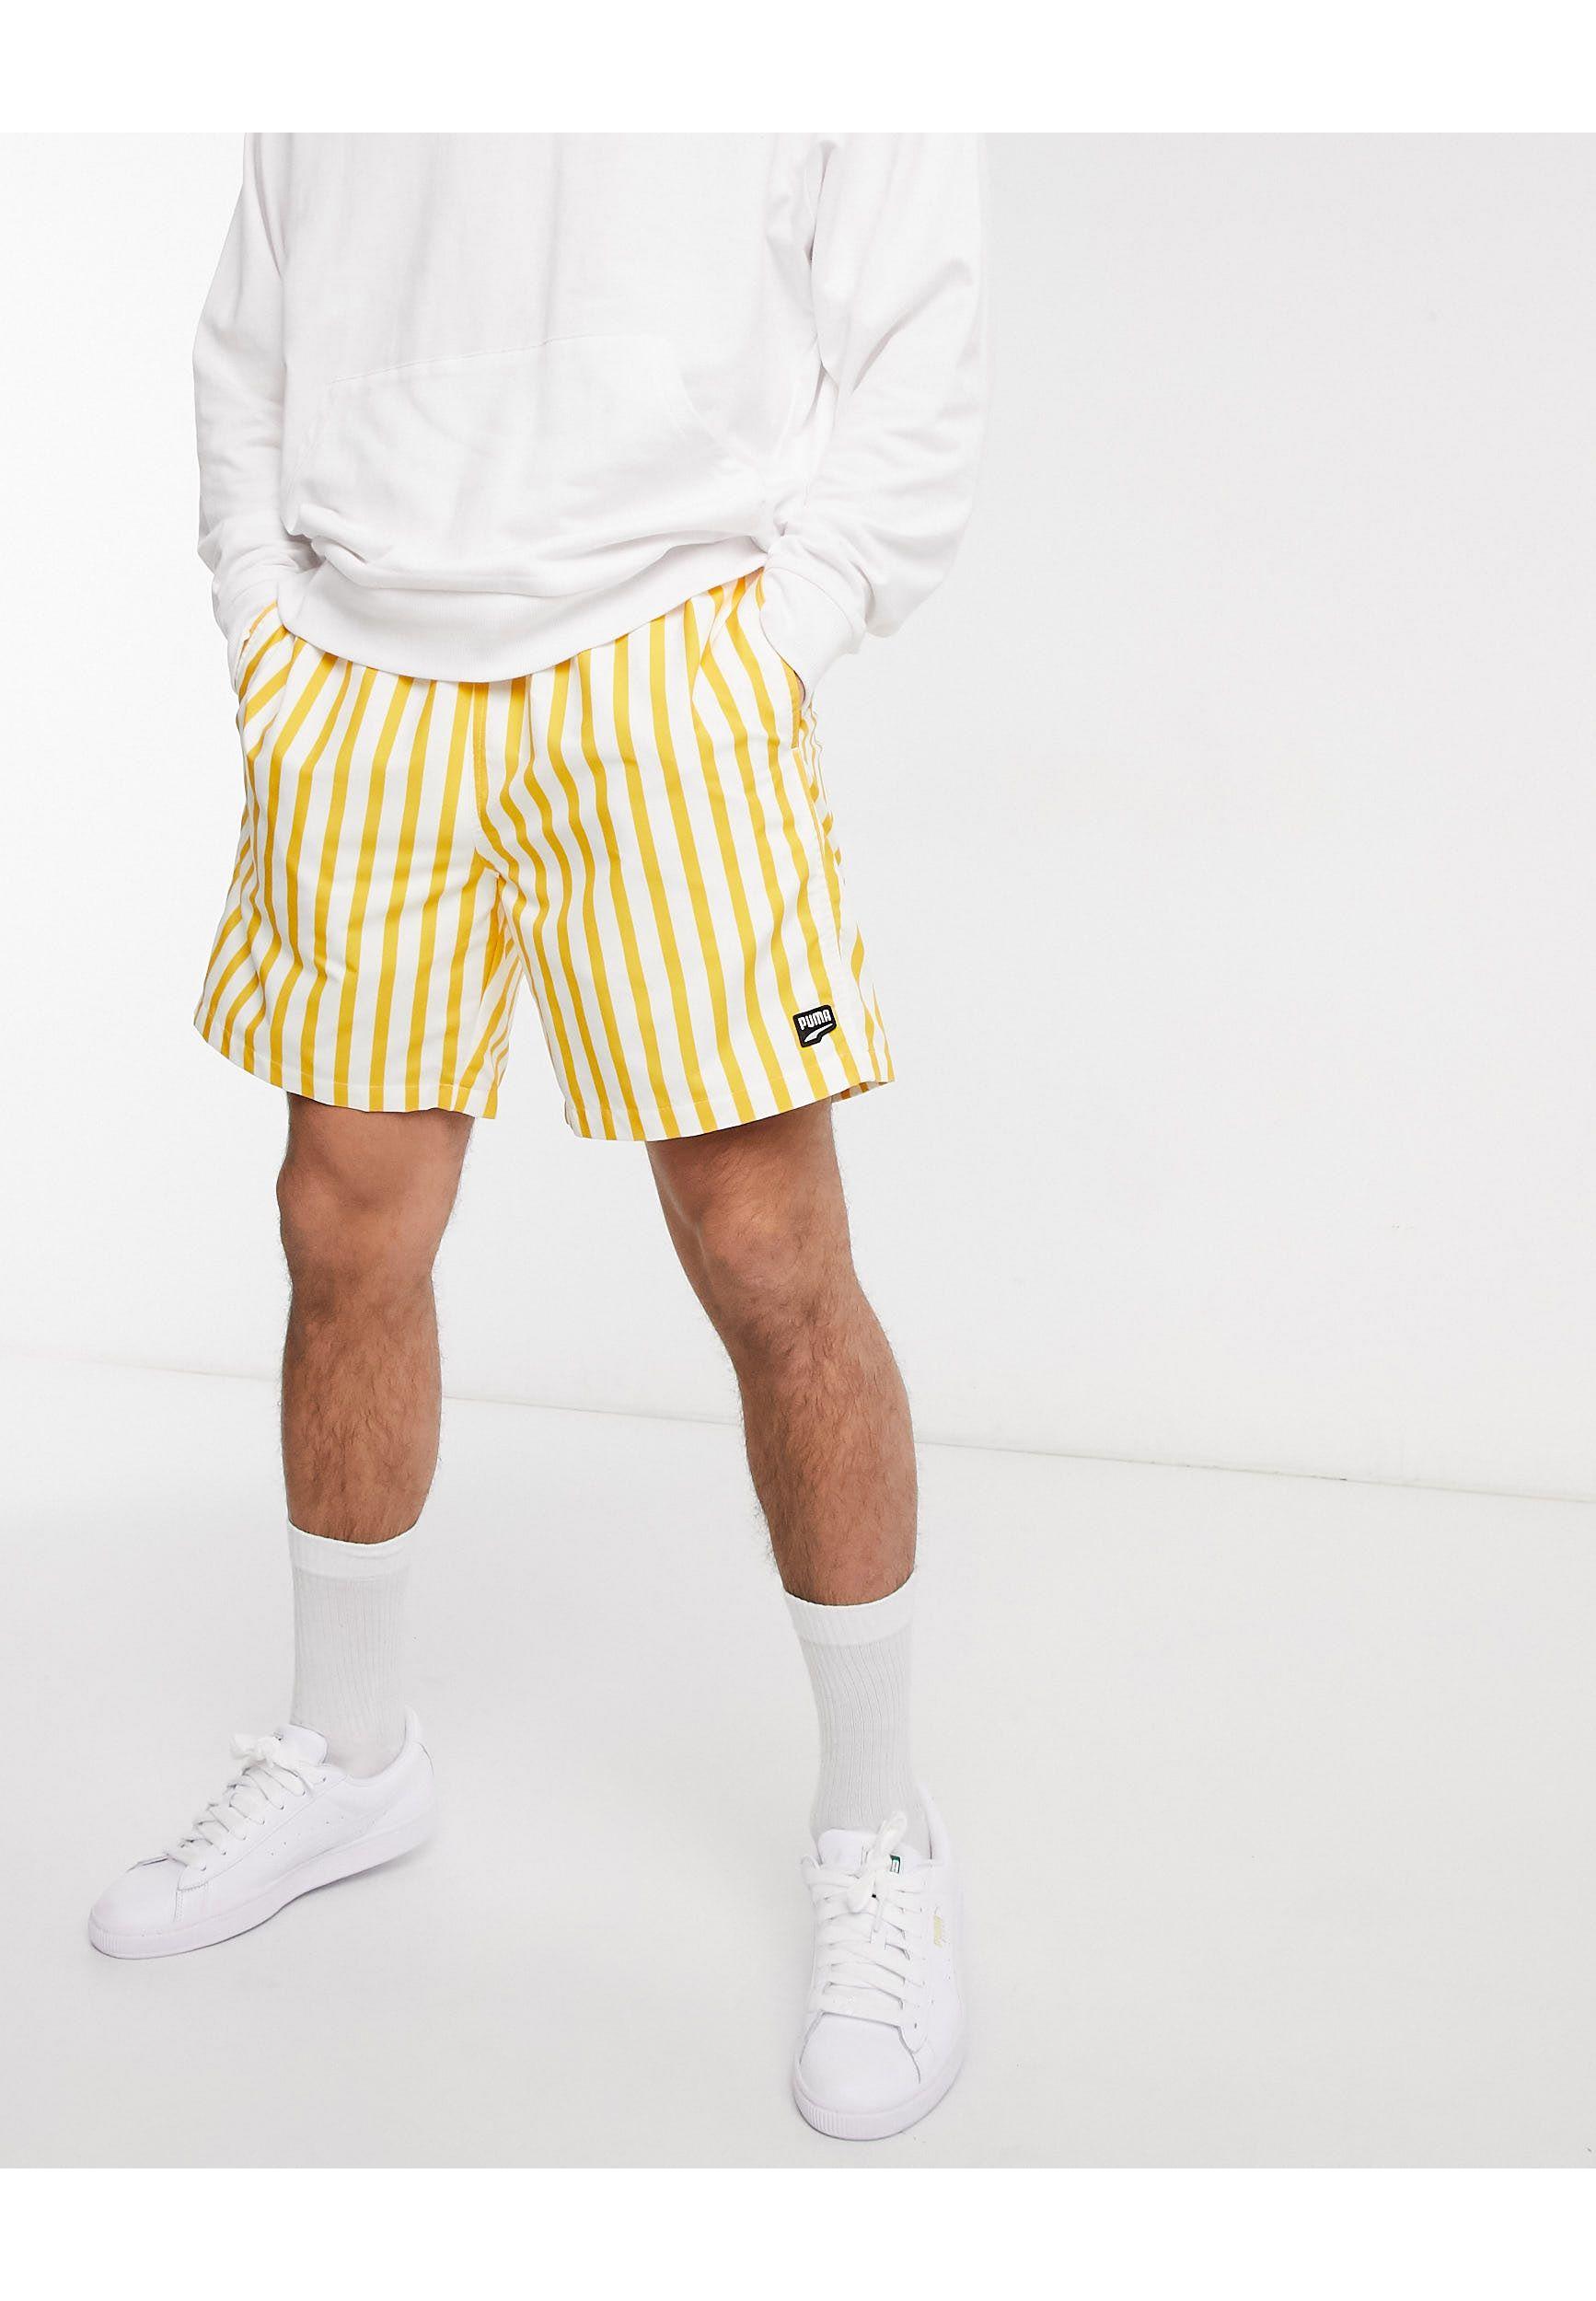 PUMA Downtown Striped Shorts in Yellow for Men | Lyst